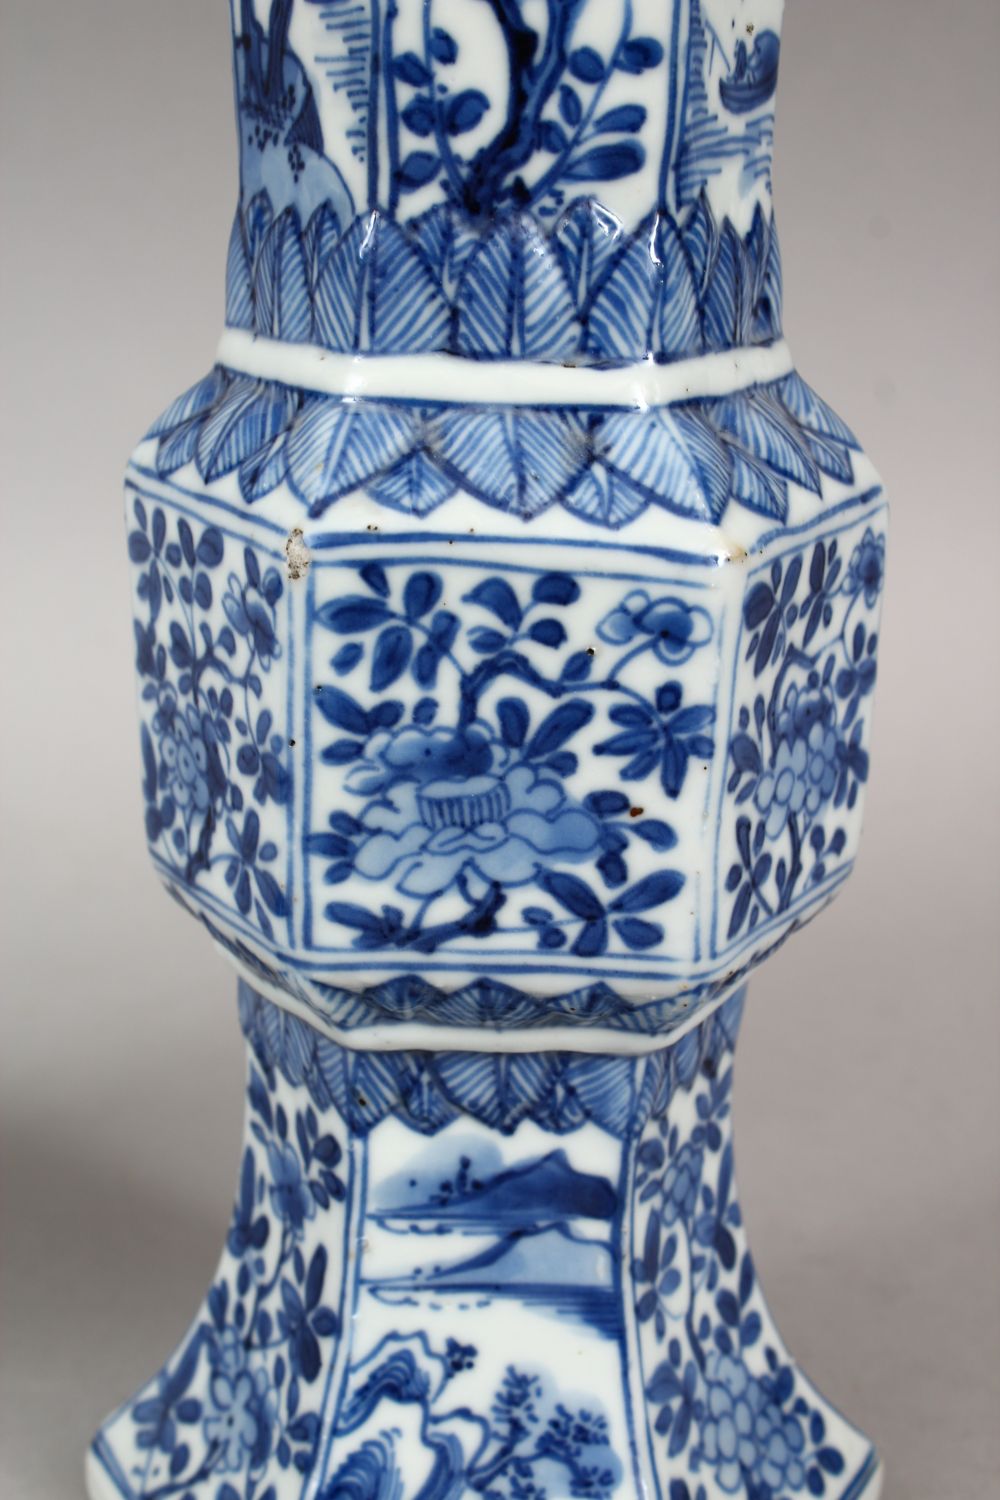 A GOOD PAIR OF 18TH CENTURY CHINESE KANGXI BLUE & WHITE GU SHAPE PORCELAIN VASES, with a multitude - Image 5 of 10